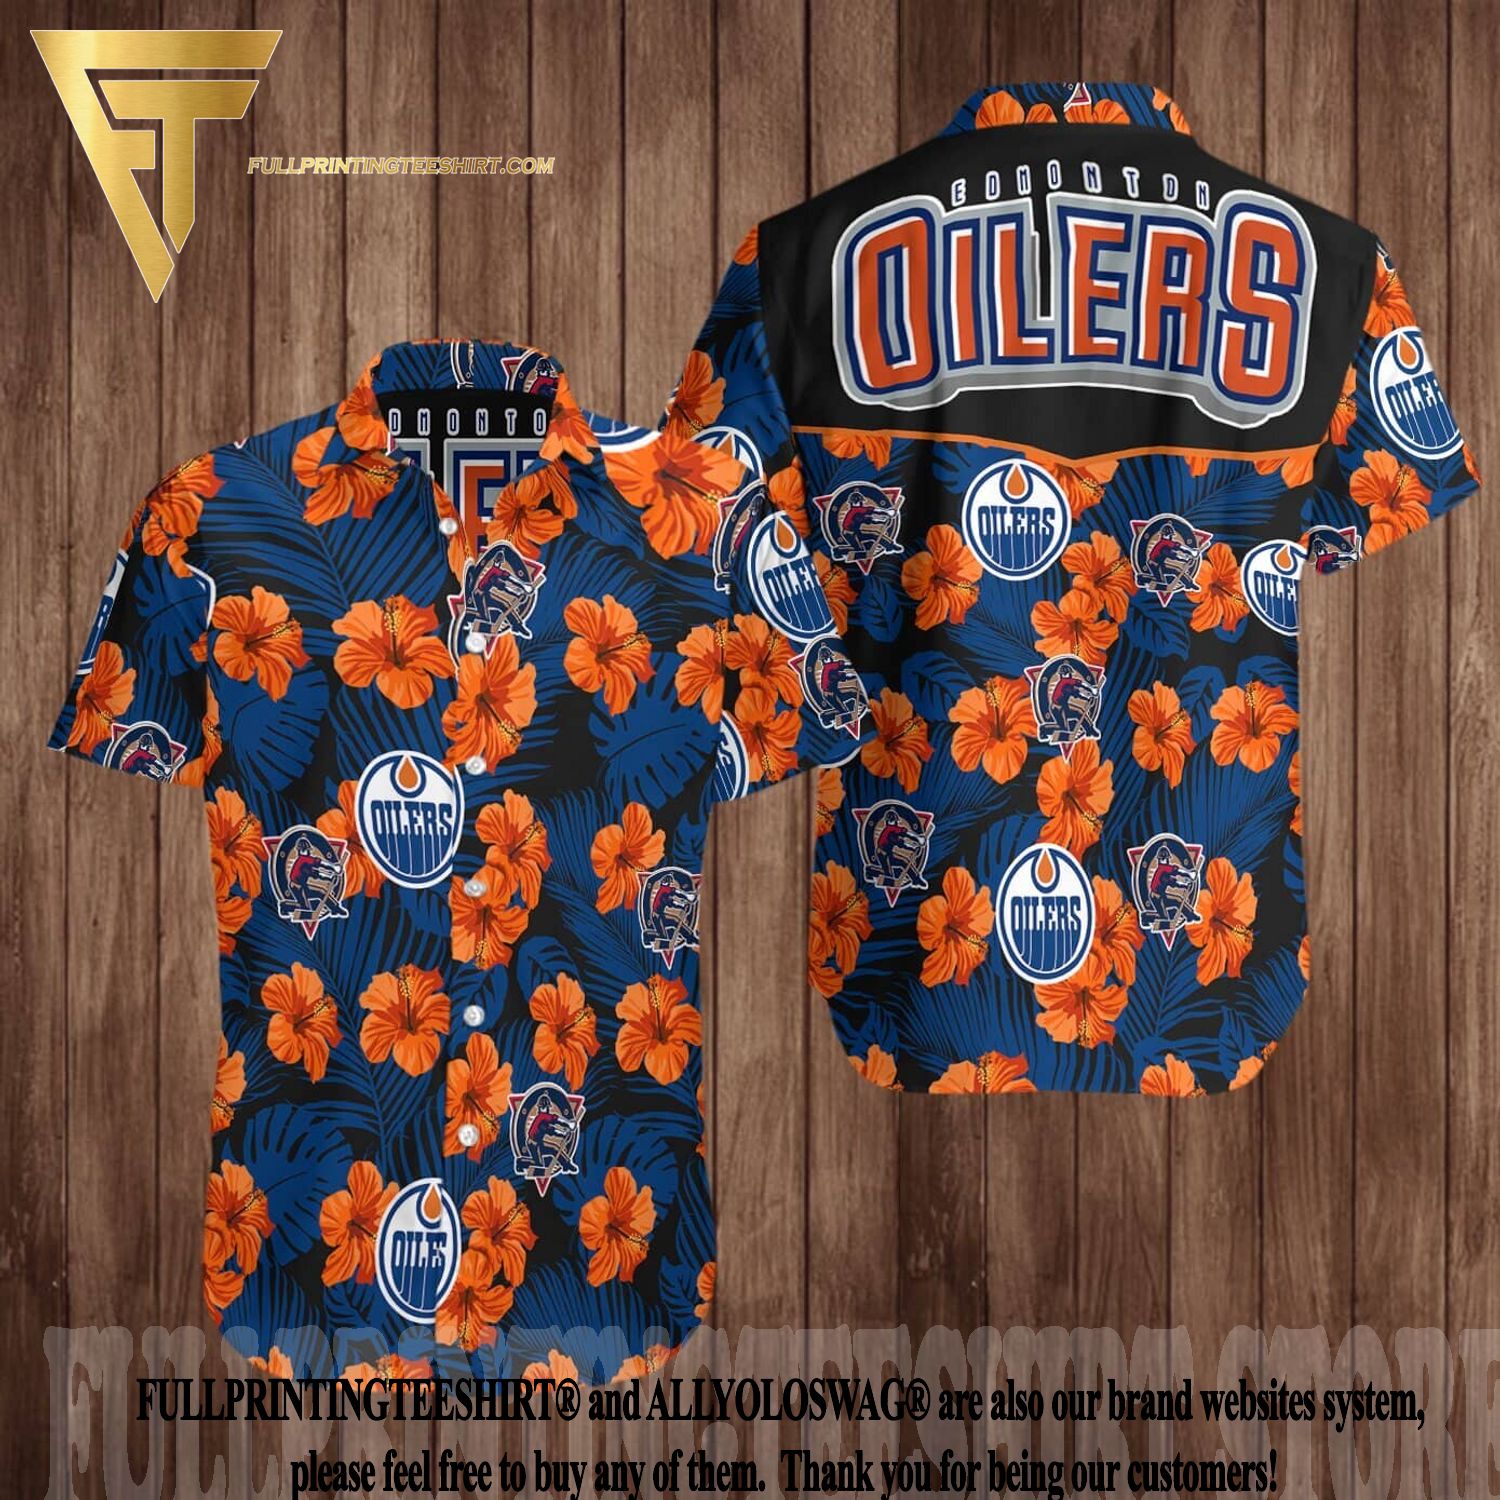 Oilers merch is selling fast and many stores in Edmonton are out of stock